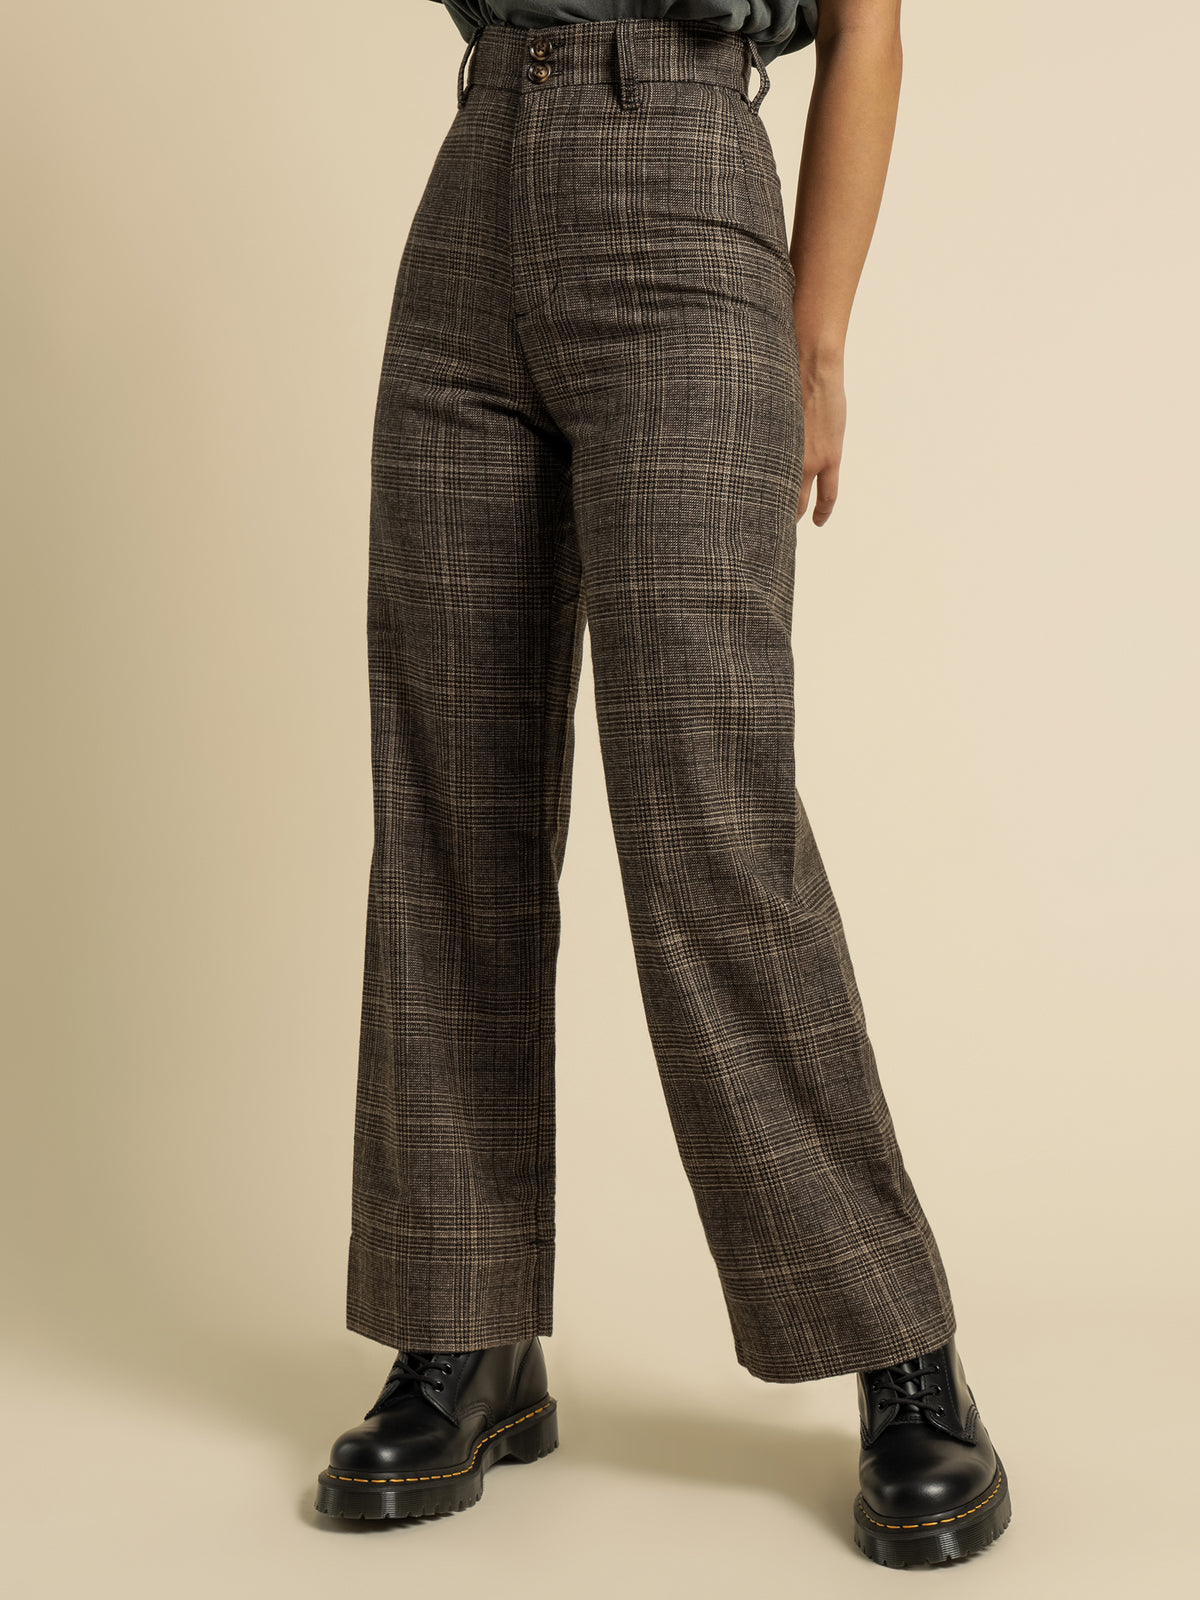 Bonnie Suiting Pants in Black Check